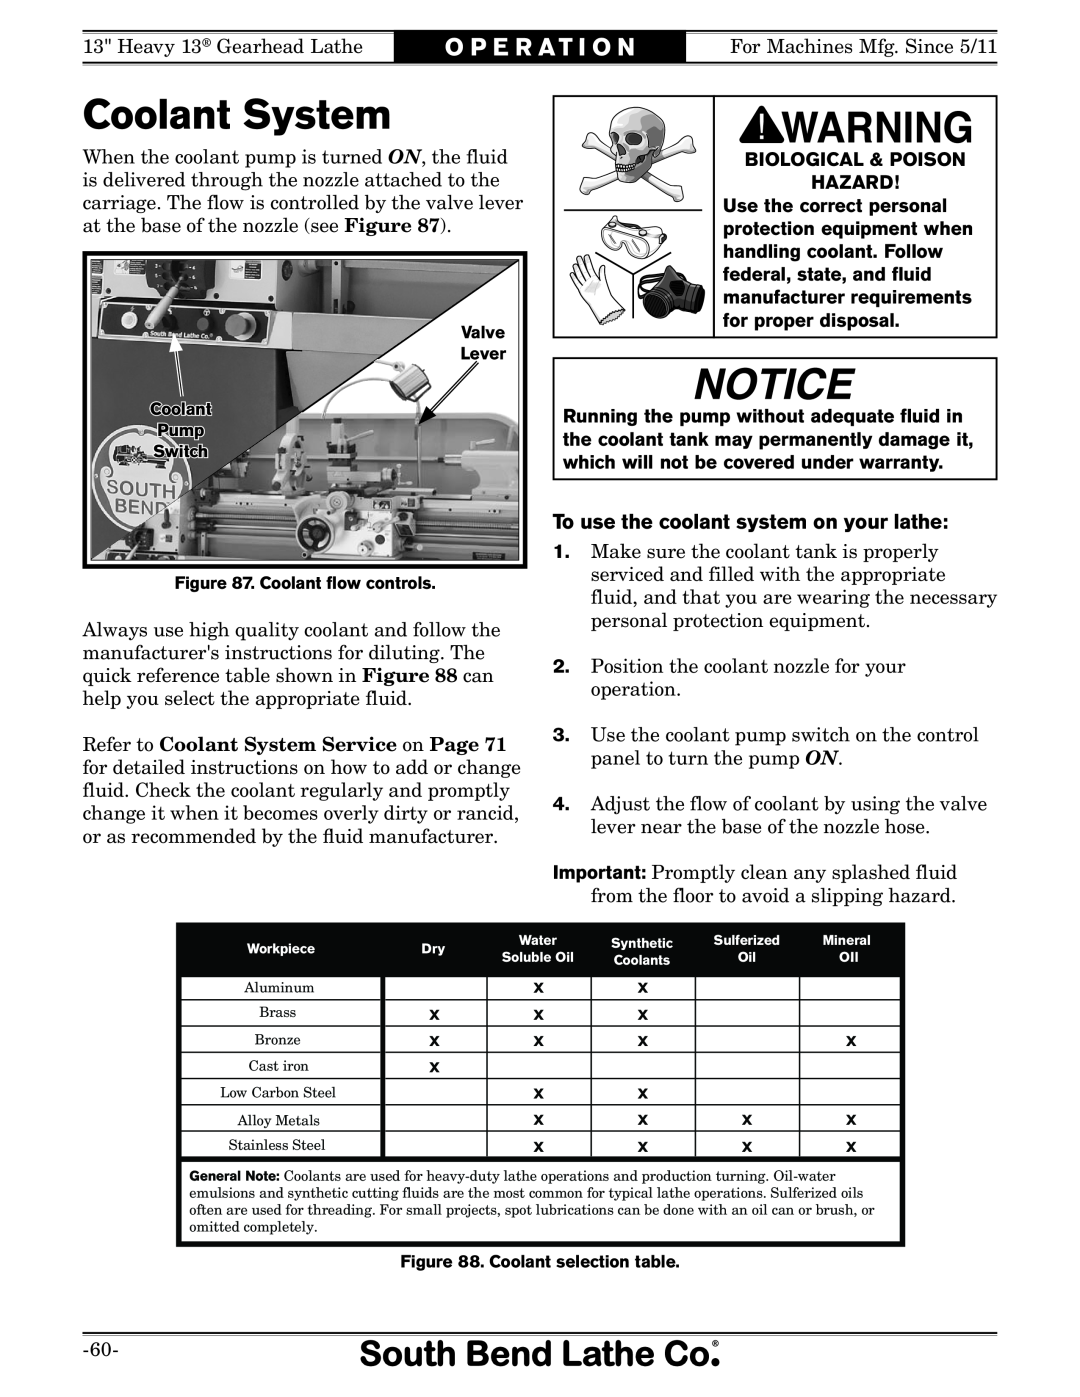 Southbend SB Coolant System, To use the coolant system on your lathe, Biological & Poison Hazard, O P E R A T I O N 